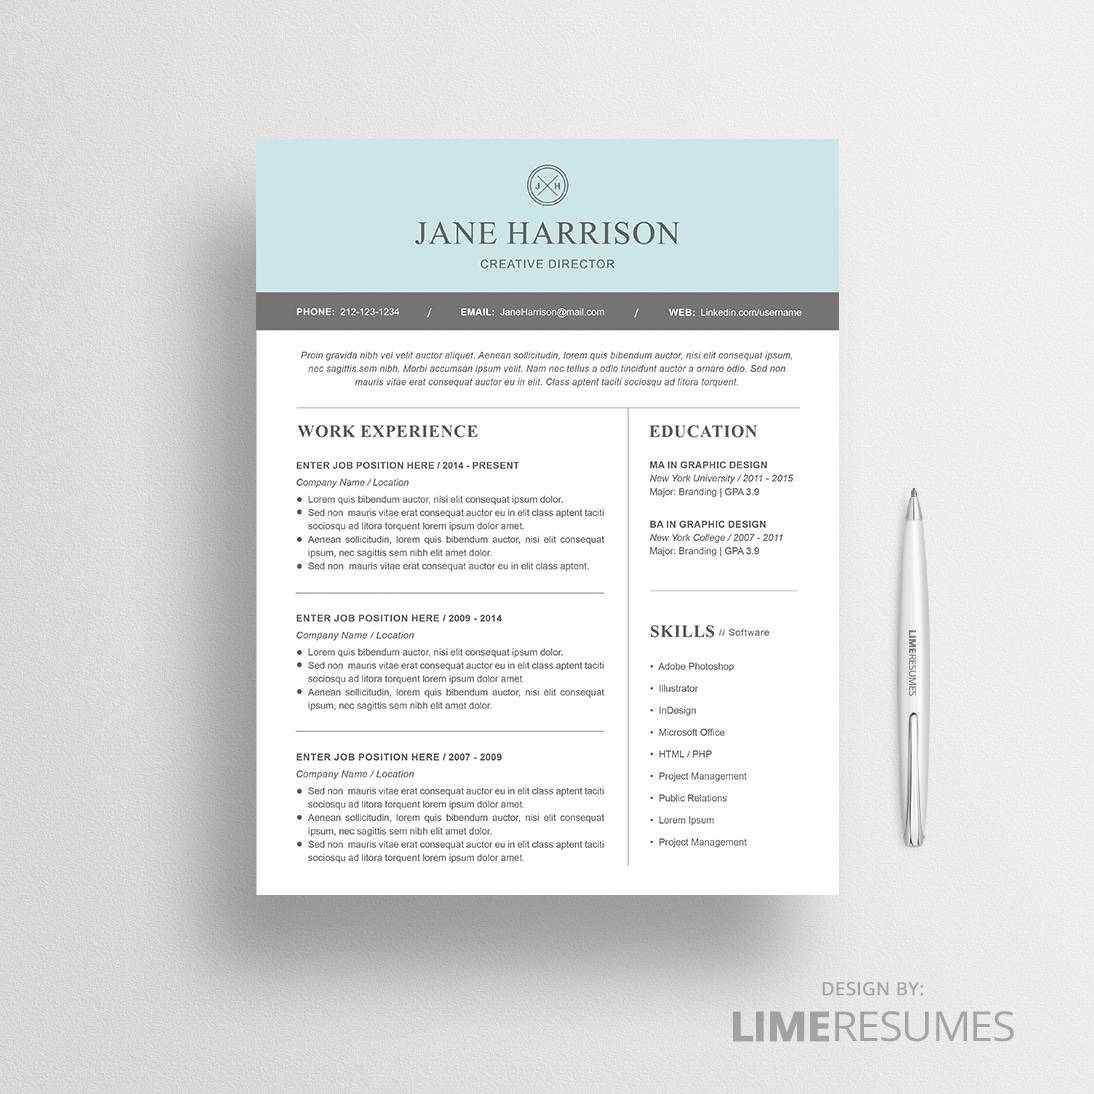 Resume Template On Word from myjobsearch.com